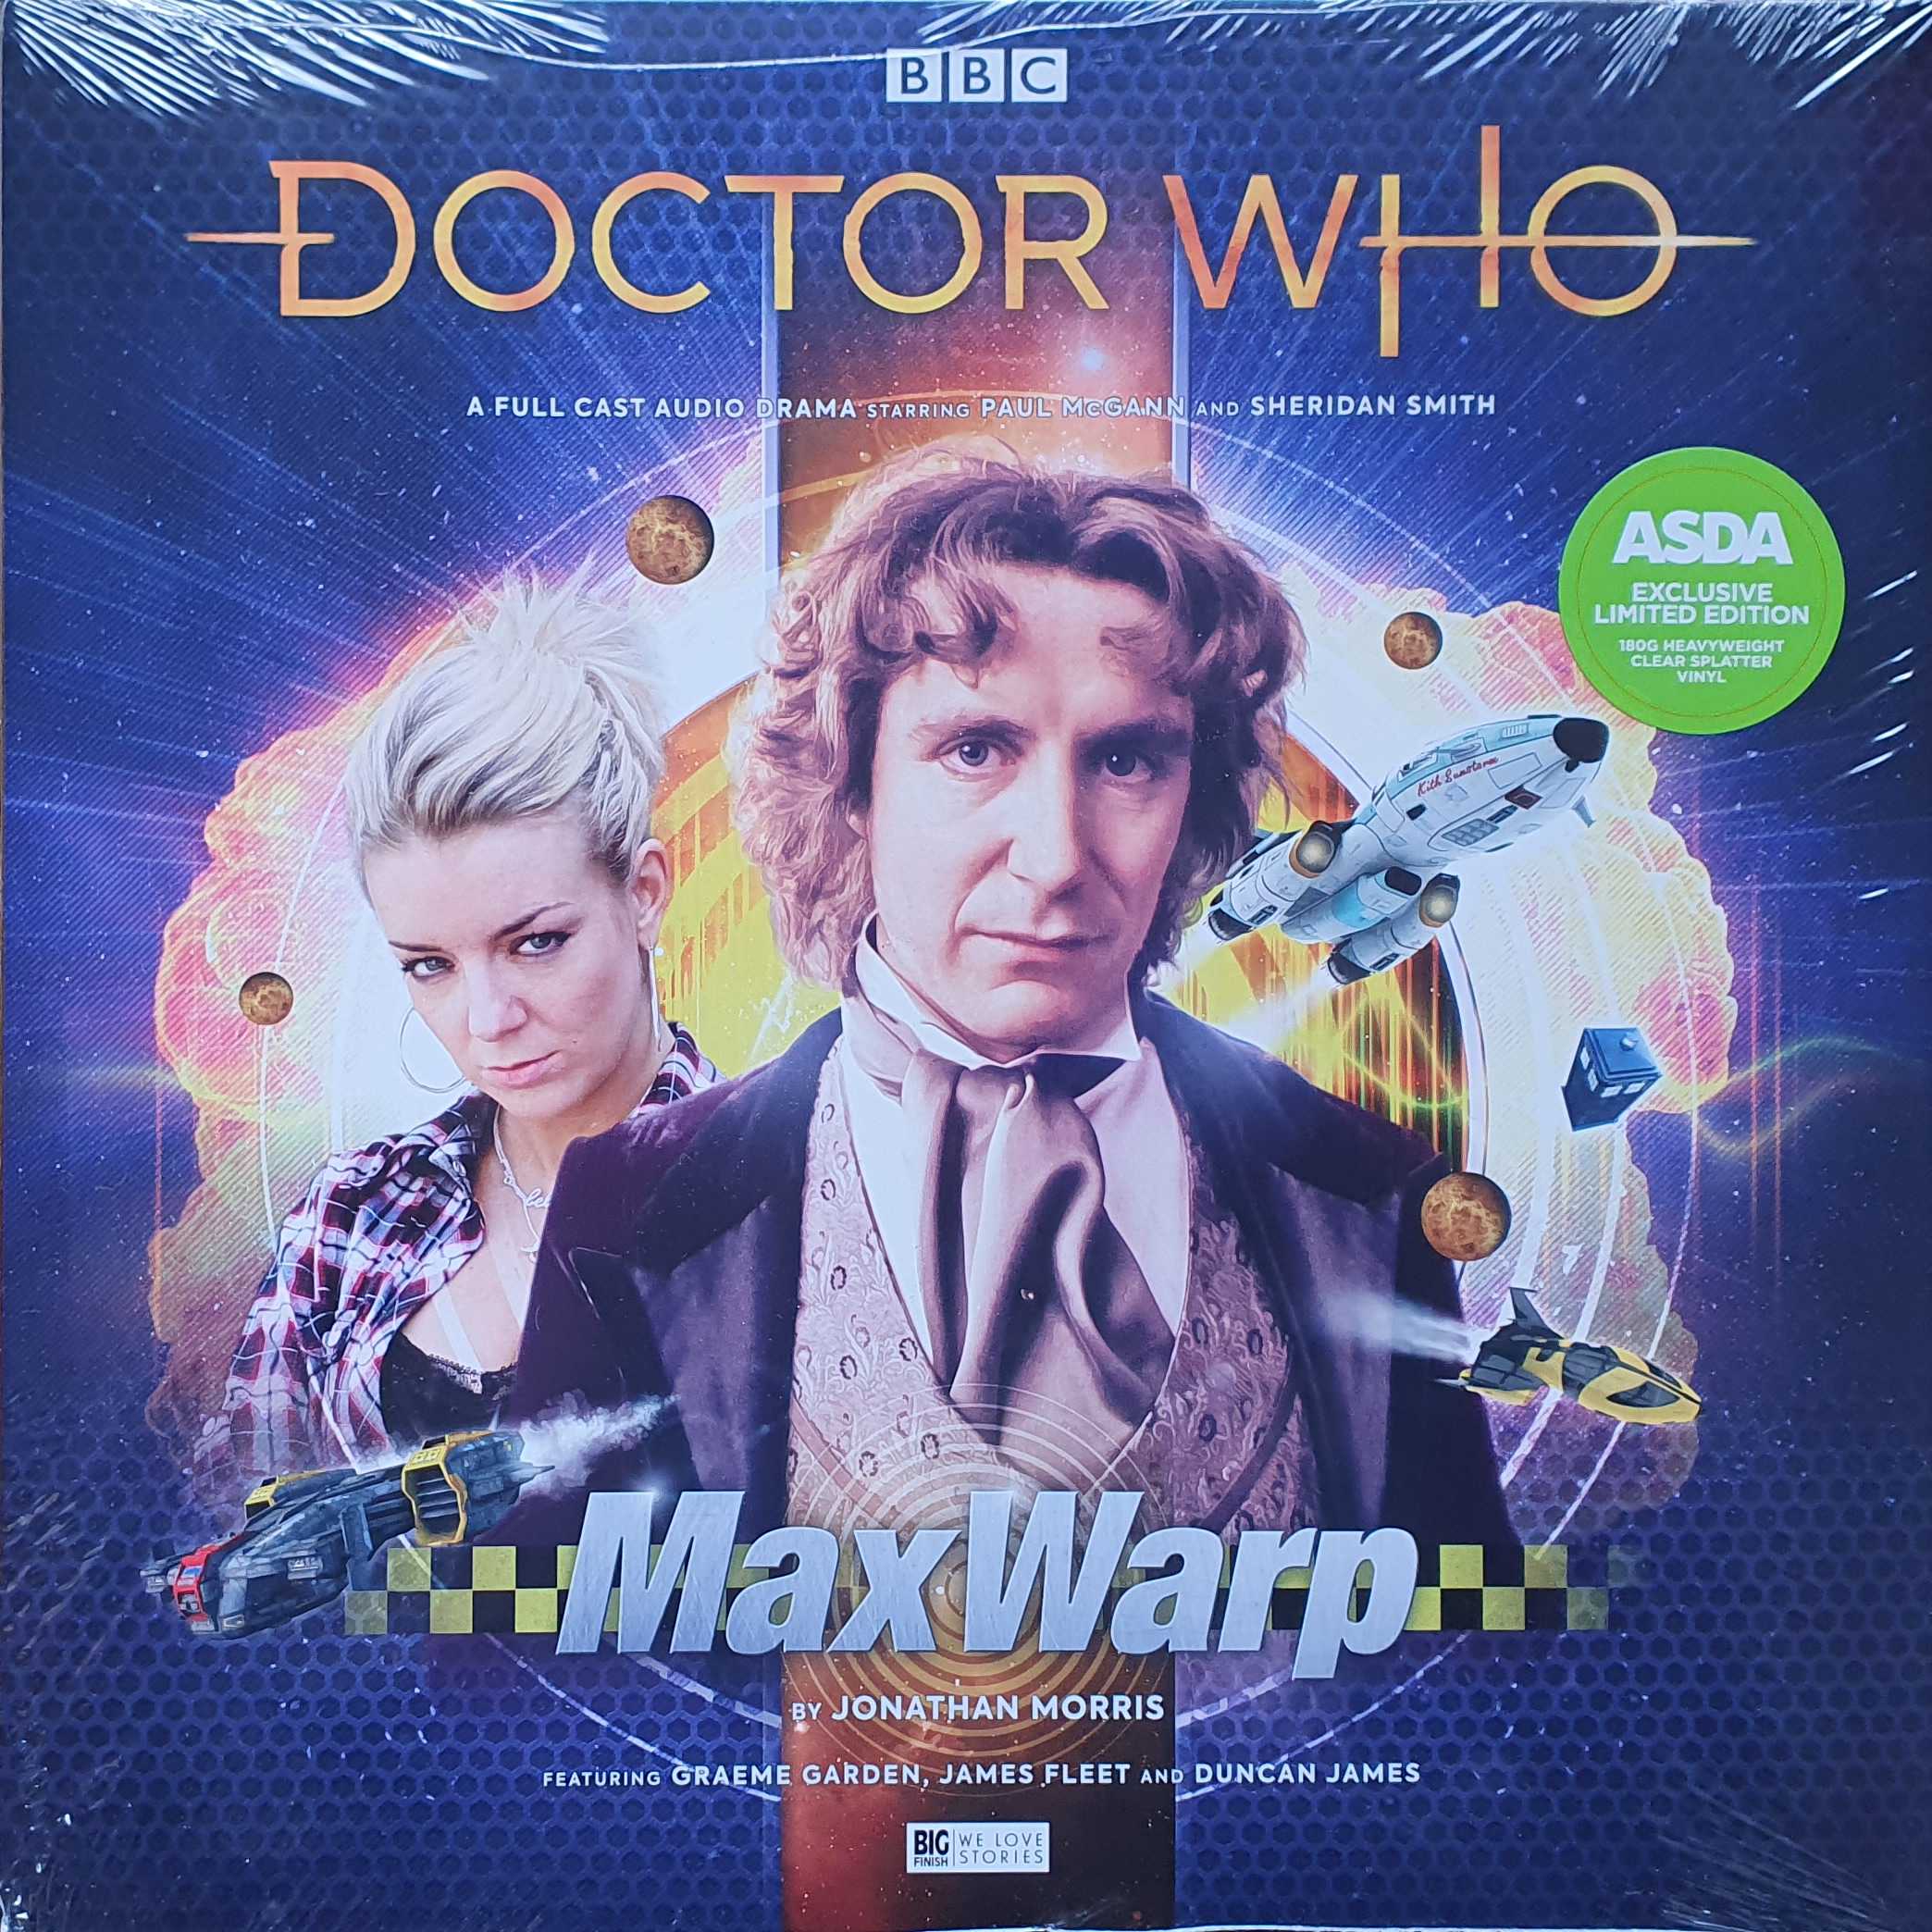 Picture of Doctor Who - Max warp by artist Jonathan Morris from the BBC albums - Records and Tapes library